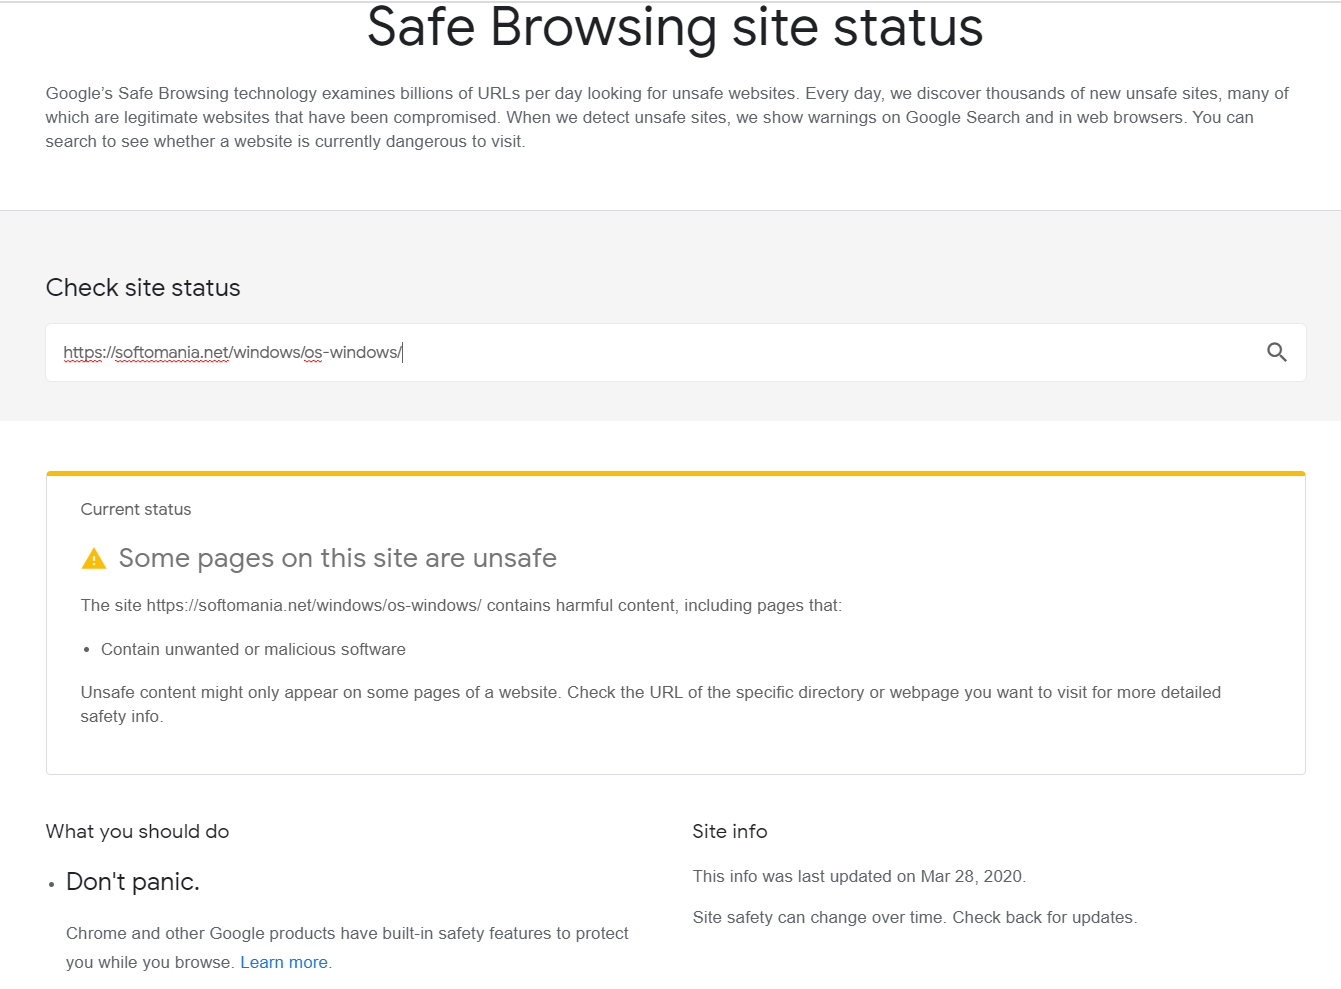 12 Free Tools To Check Website Safety And Avoid Scams And Security Risks - robloxtoolcom reviews check if site is scam or legit